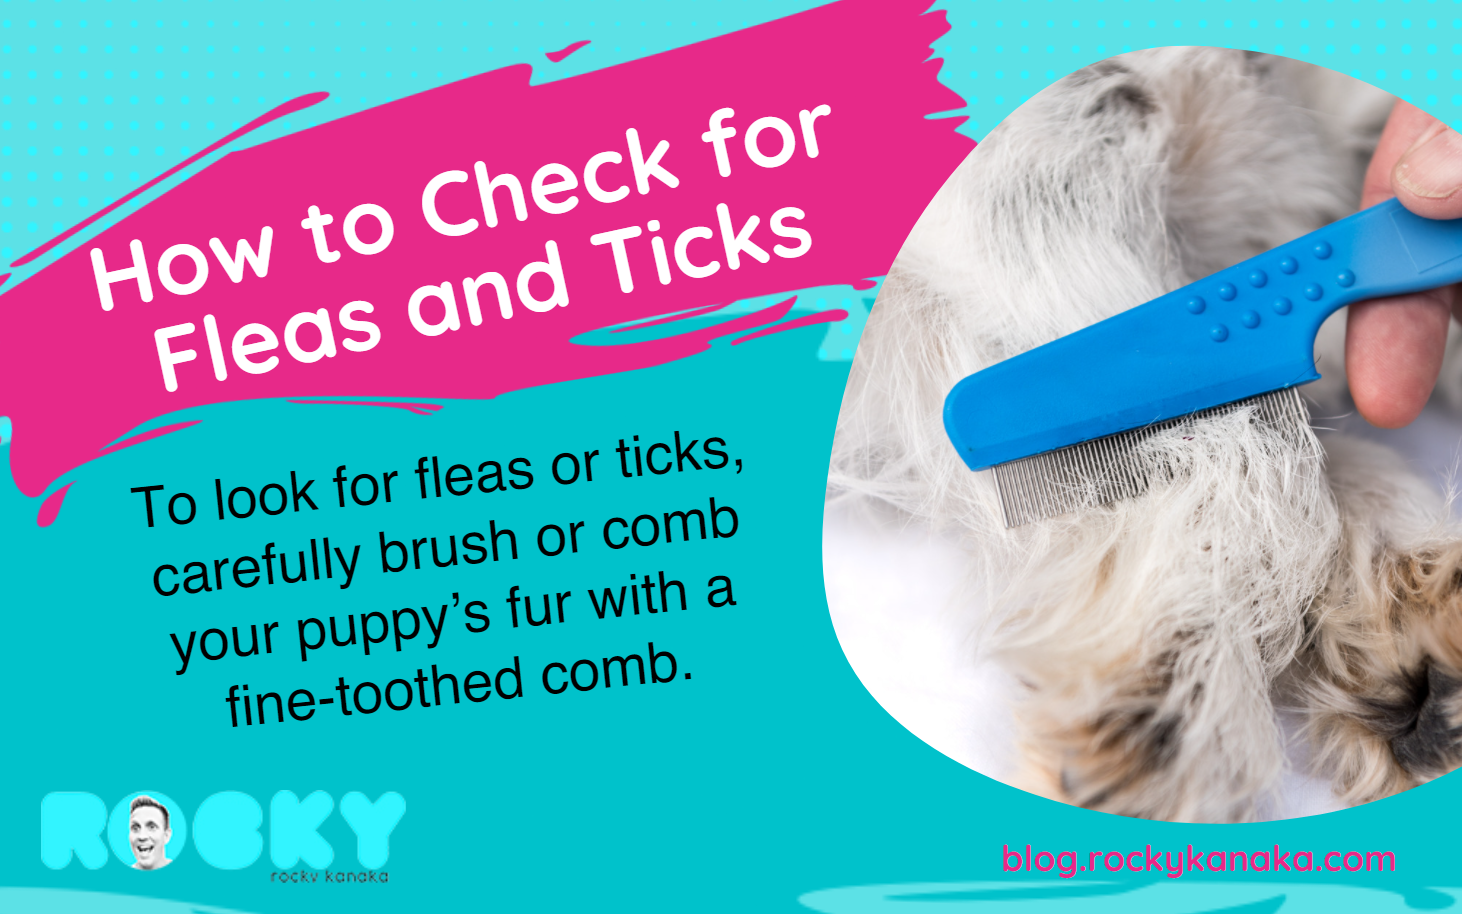 How to check for Fleas and Ticks